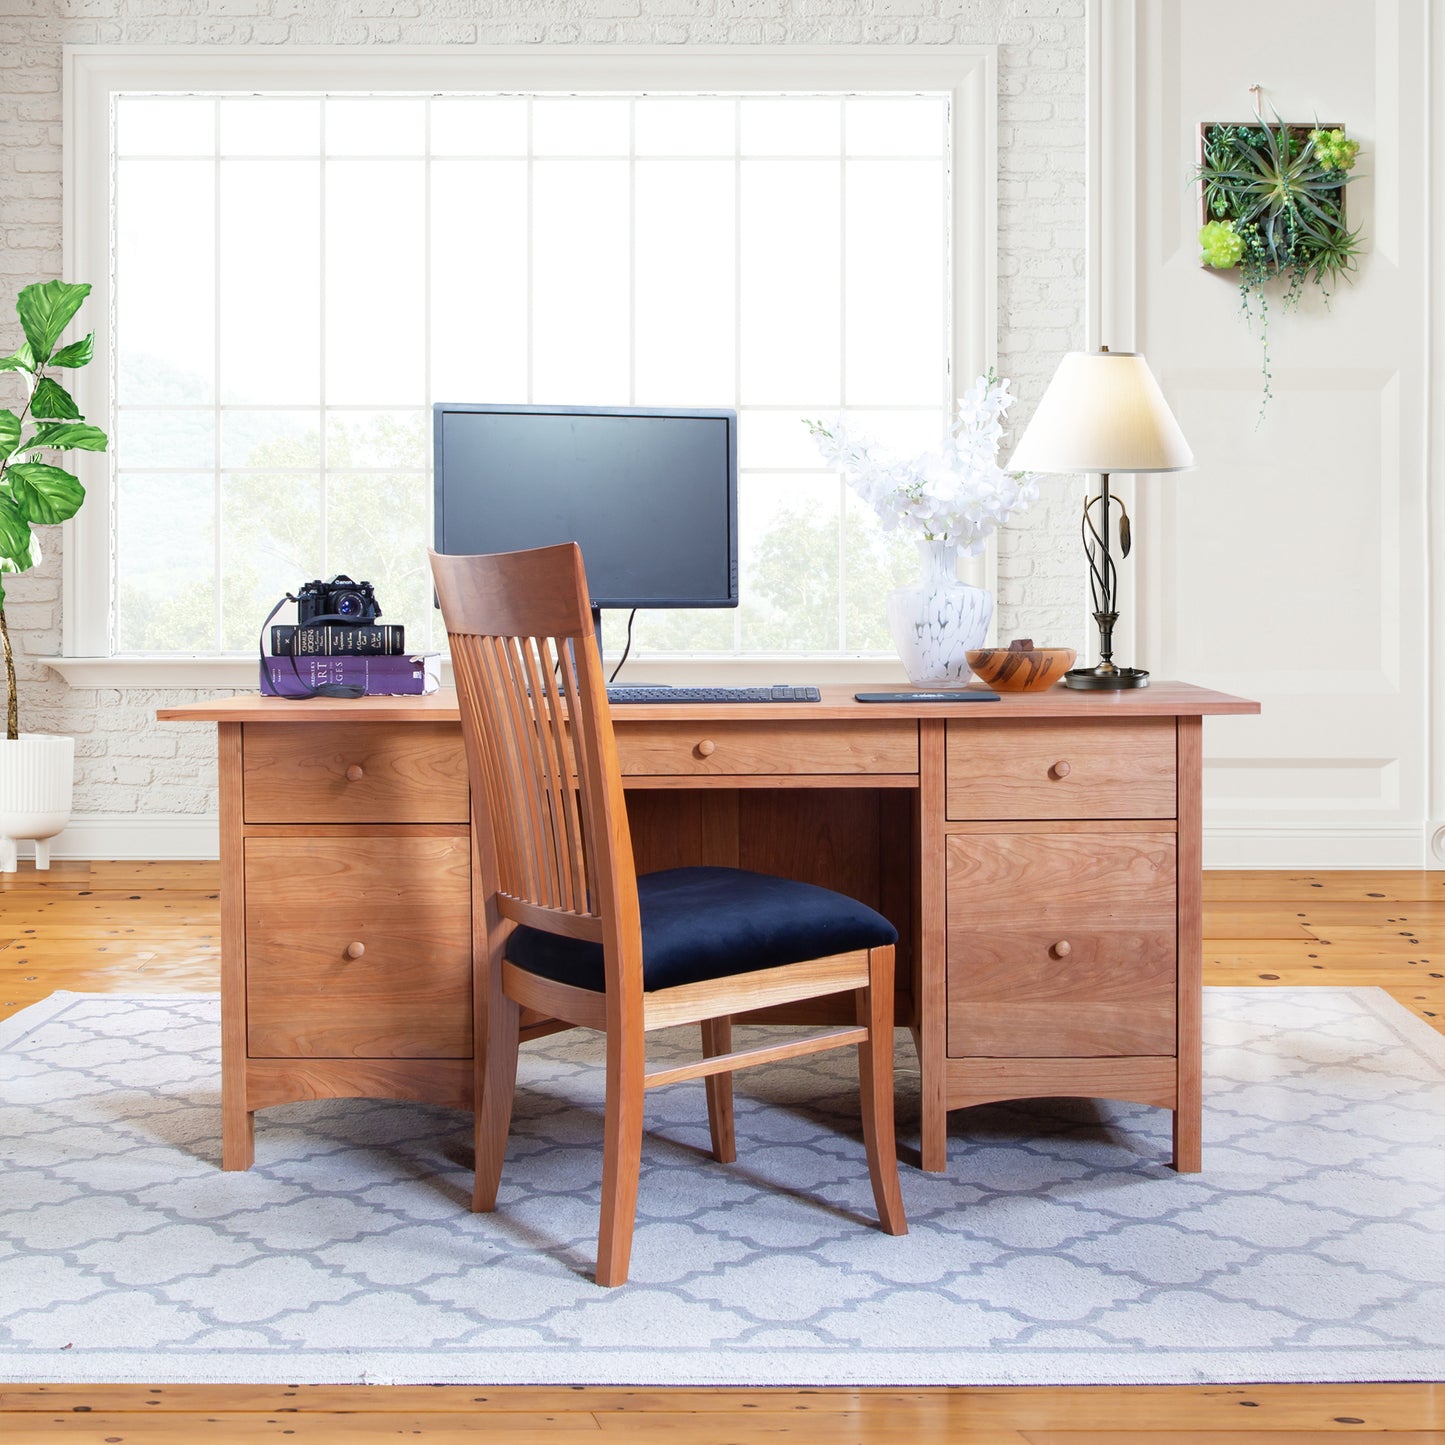 A handmade Vermont Furniture Designs Burlington Shaker Executive Desk and chair set in a bright room with a computer monitor, decorative plants, a camera, and various desk accessories.